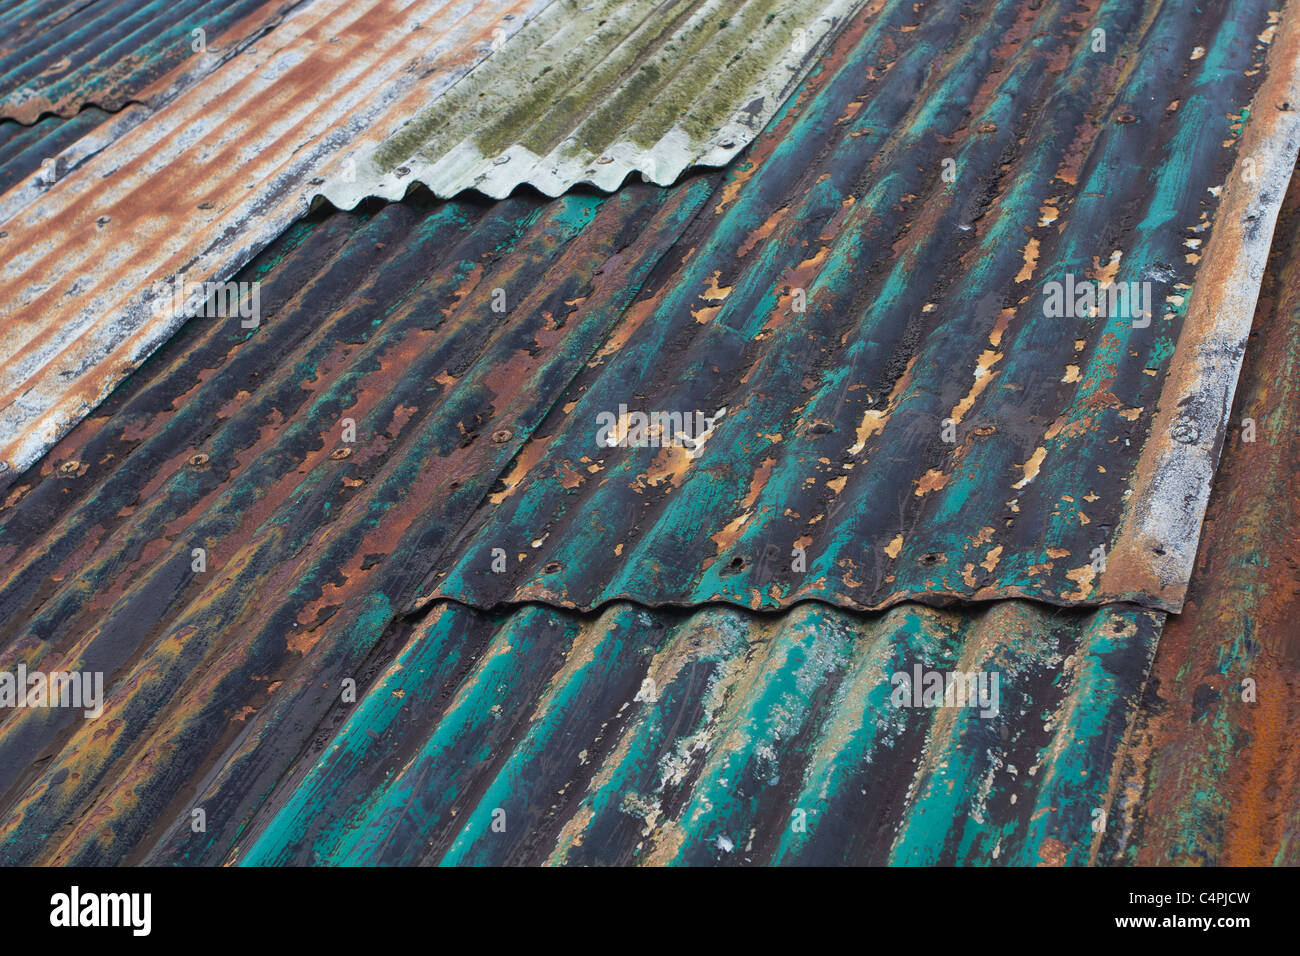 Corrugated iron roof weathered by the sea and sun. Stock Photo